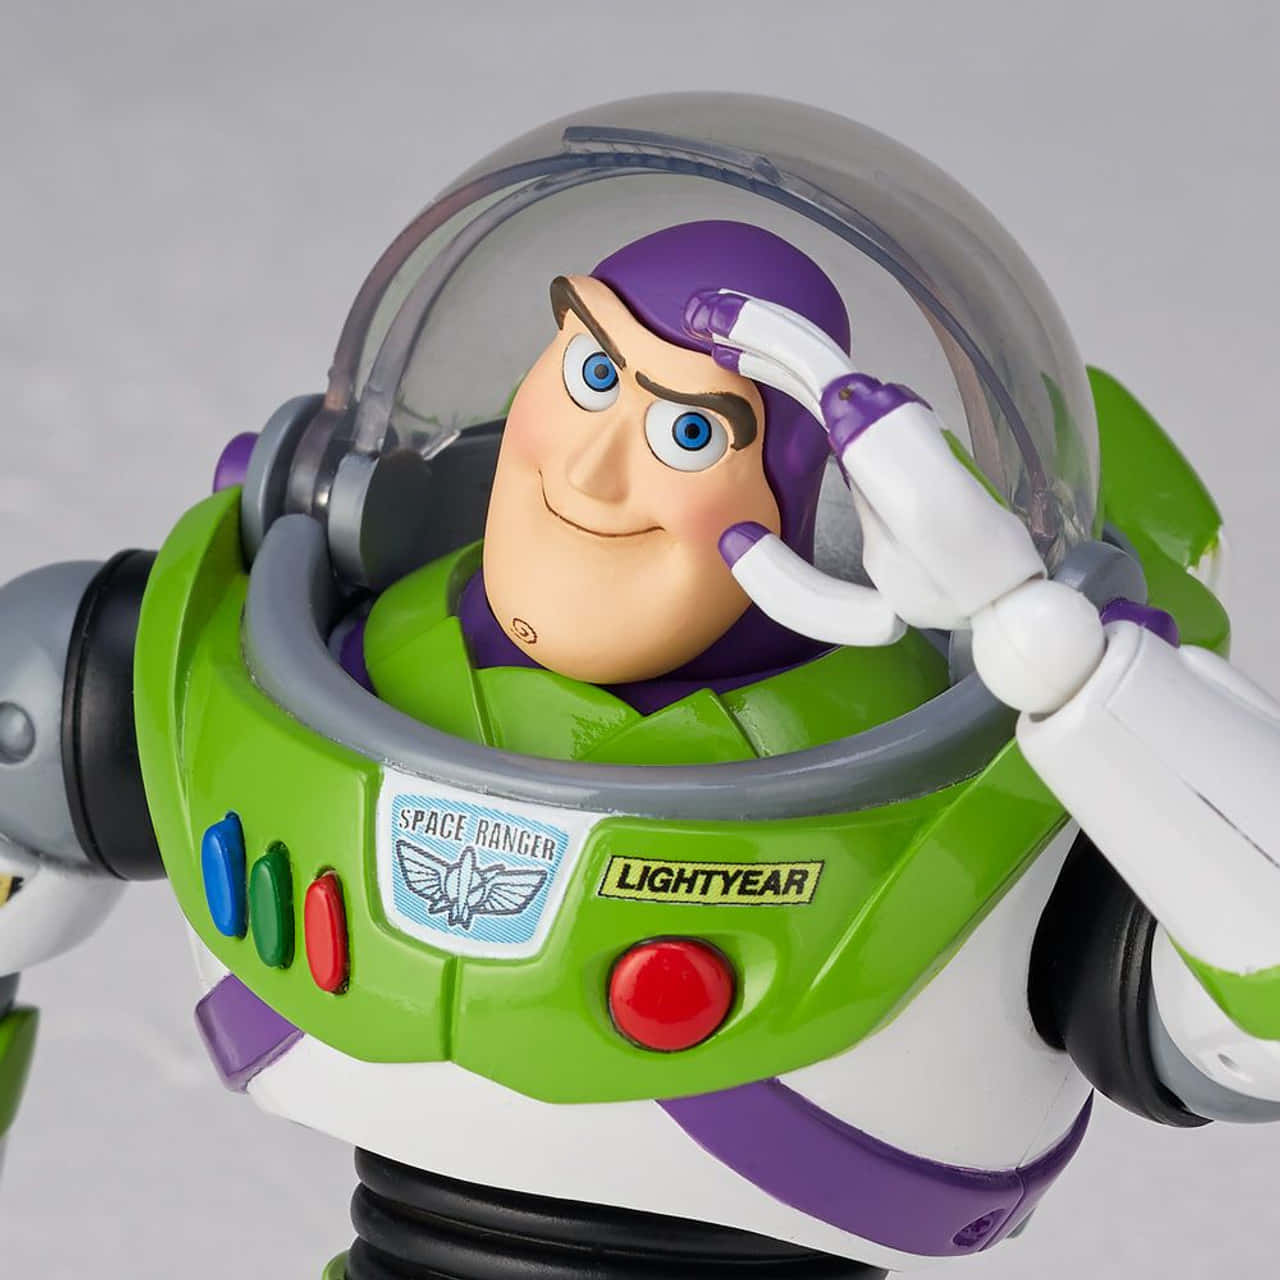 "Buzz Lightyear to the Rescue!"